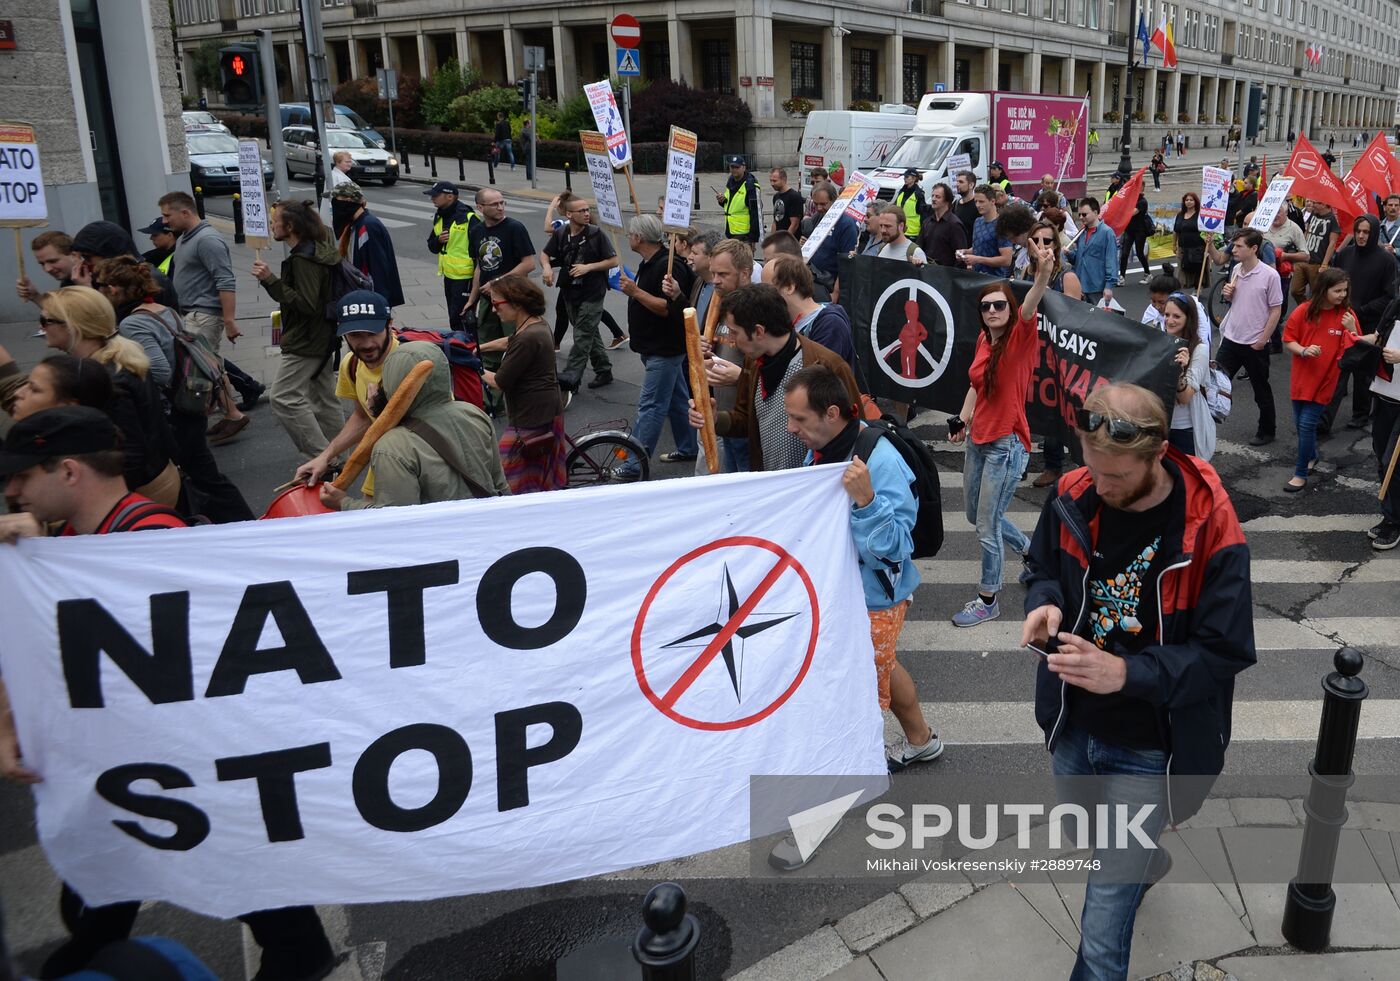 Protests against NATO summit